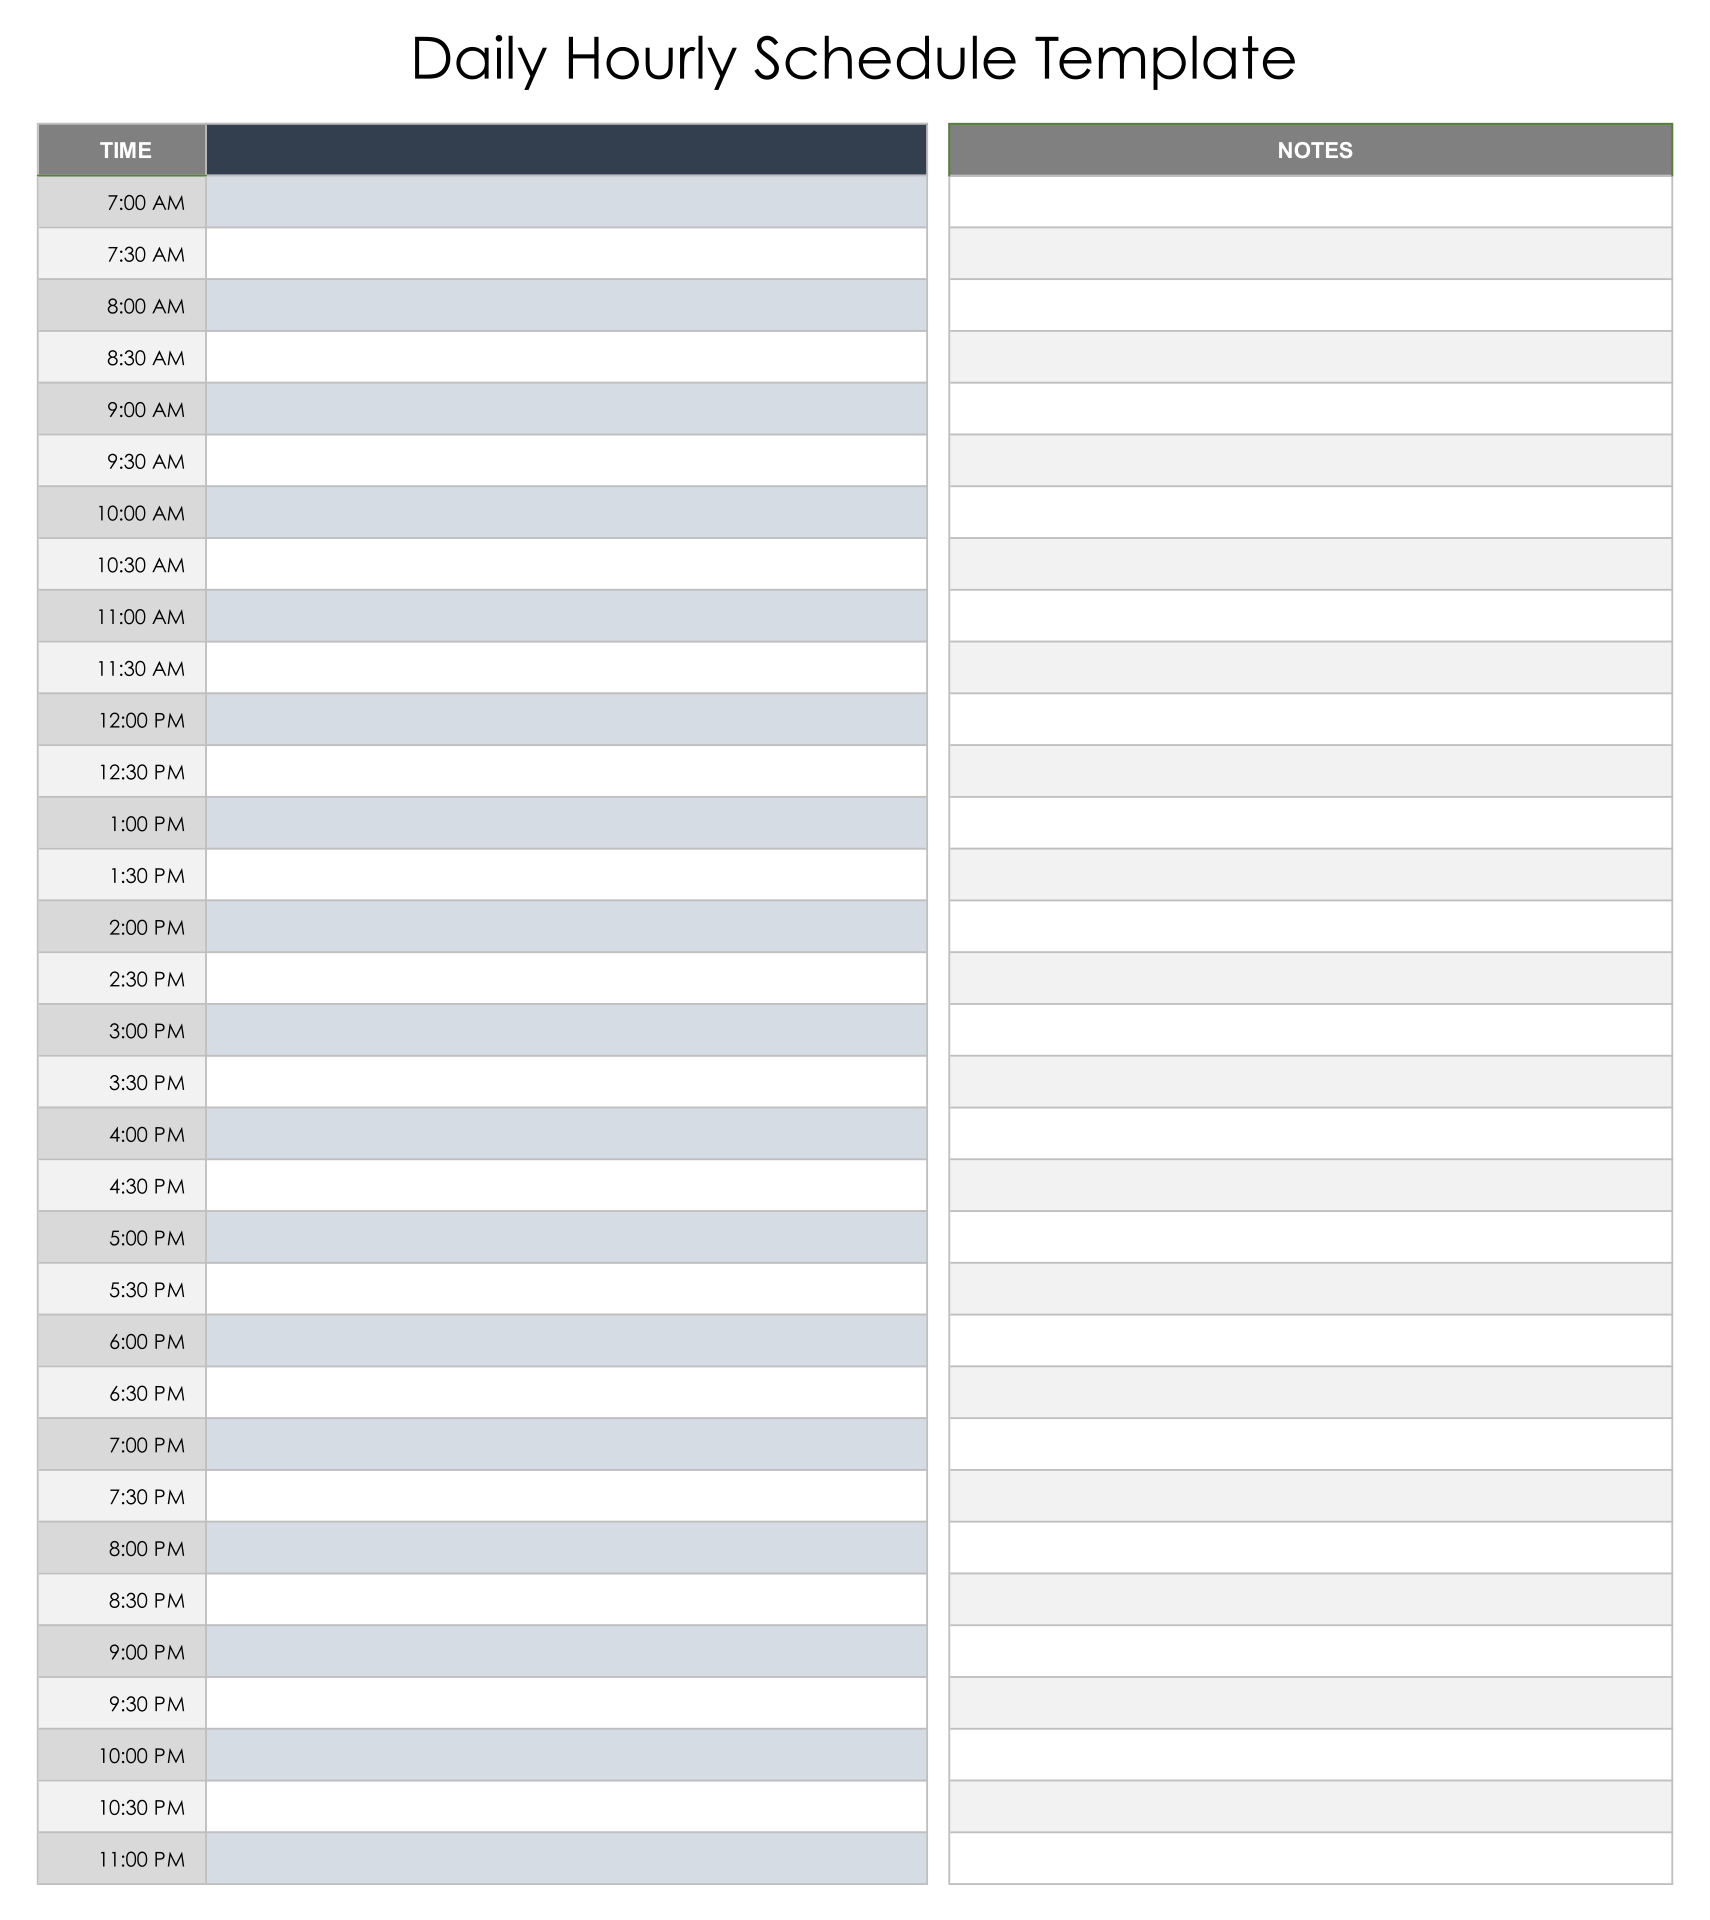 printable daily hourly schedule template 61